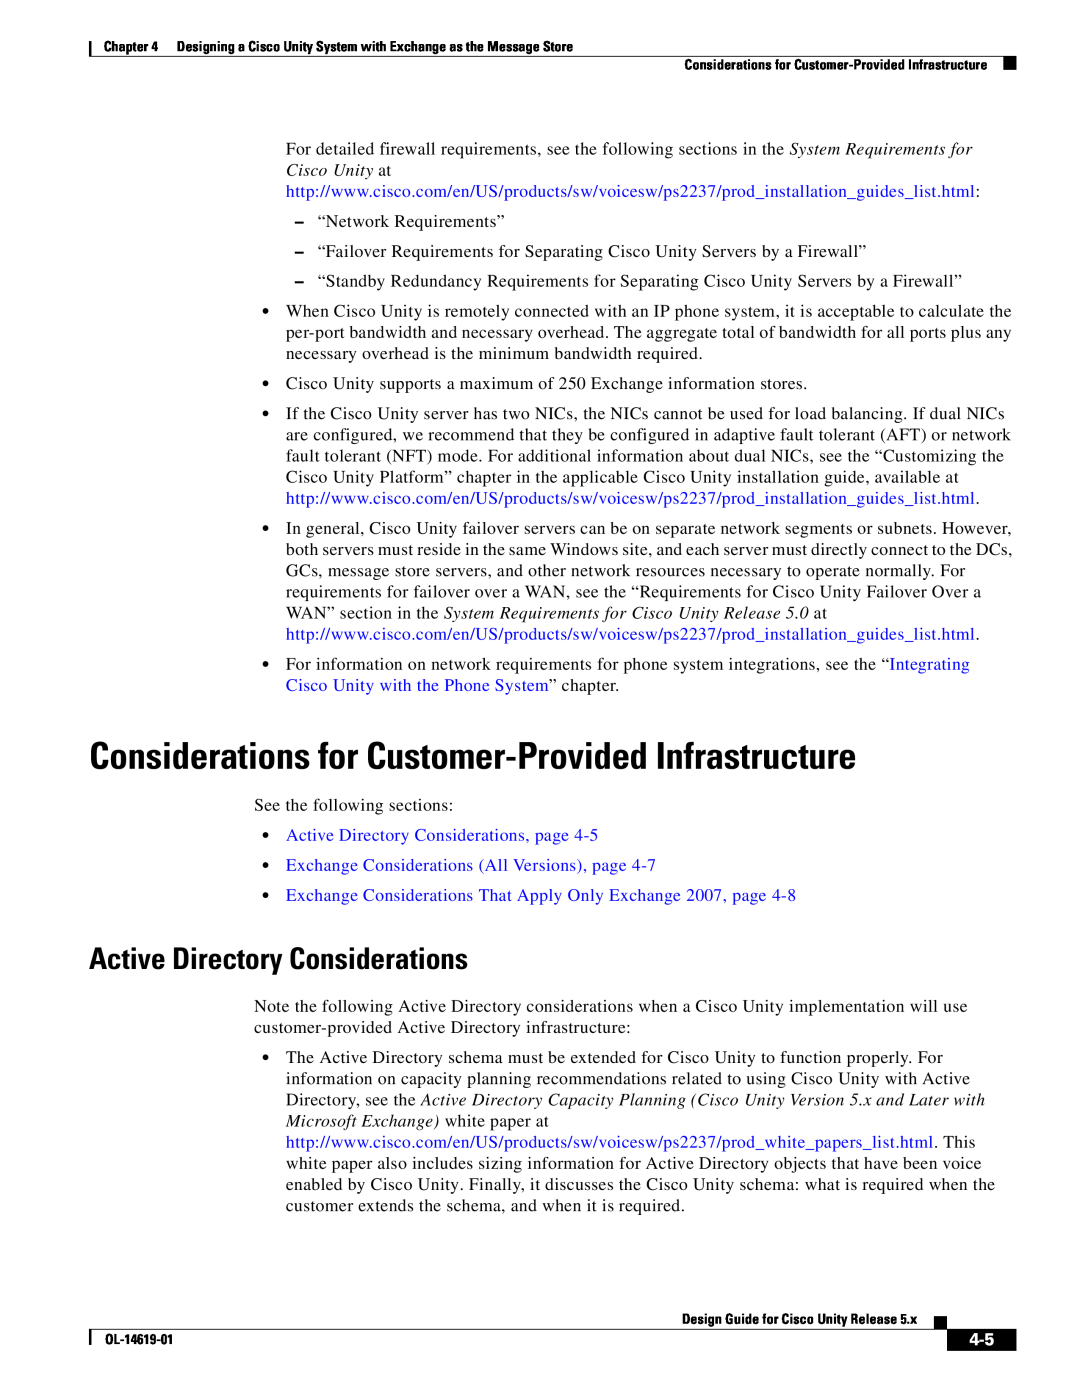 Cisco Systems OL-14619-01 manual Considerations for Customer-Provided Infrastructure, Active Directory Considerations 